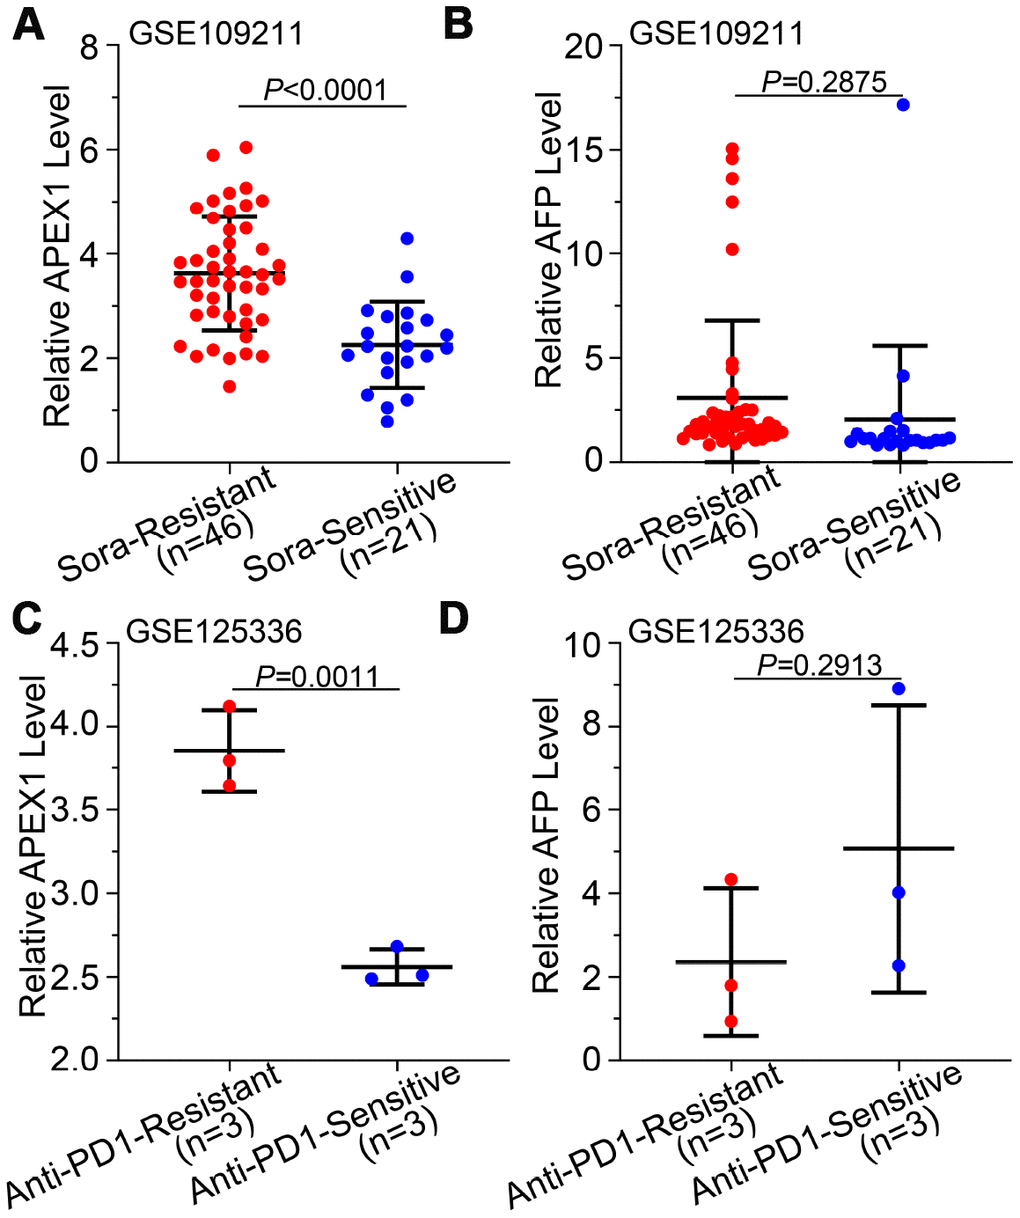 High APEX1 expression correlates with resistance against sorafenib and anti-PD1 immunotherapy in HCC patients. (A, B) APEX1 and AFP mRNA expression in 46 sorafenib-resistant and 21 sorafenib-sensitive HCC patients from the GSE109211 dataset is shown. (C, D) APEX1 and AFP expression in three anti-PD1 immunotherapy-resistant and three anti-PD1 immunotherapy-sensitive HCC patients belonging to the GSE125336 dataset is shown.